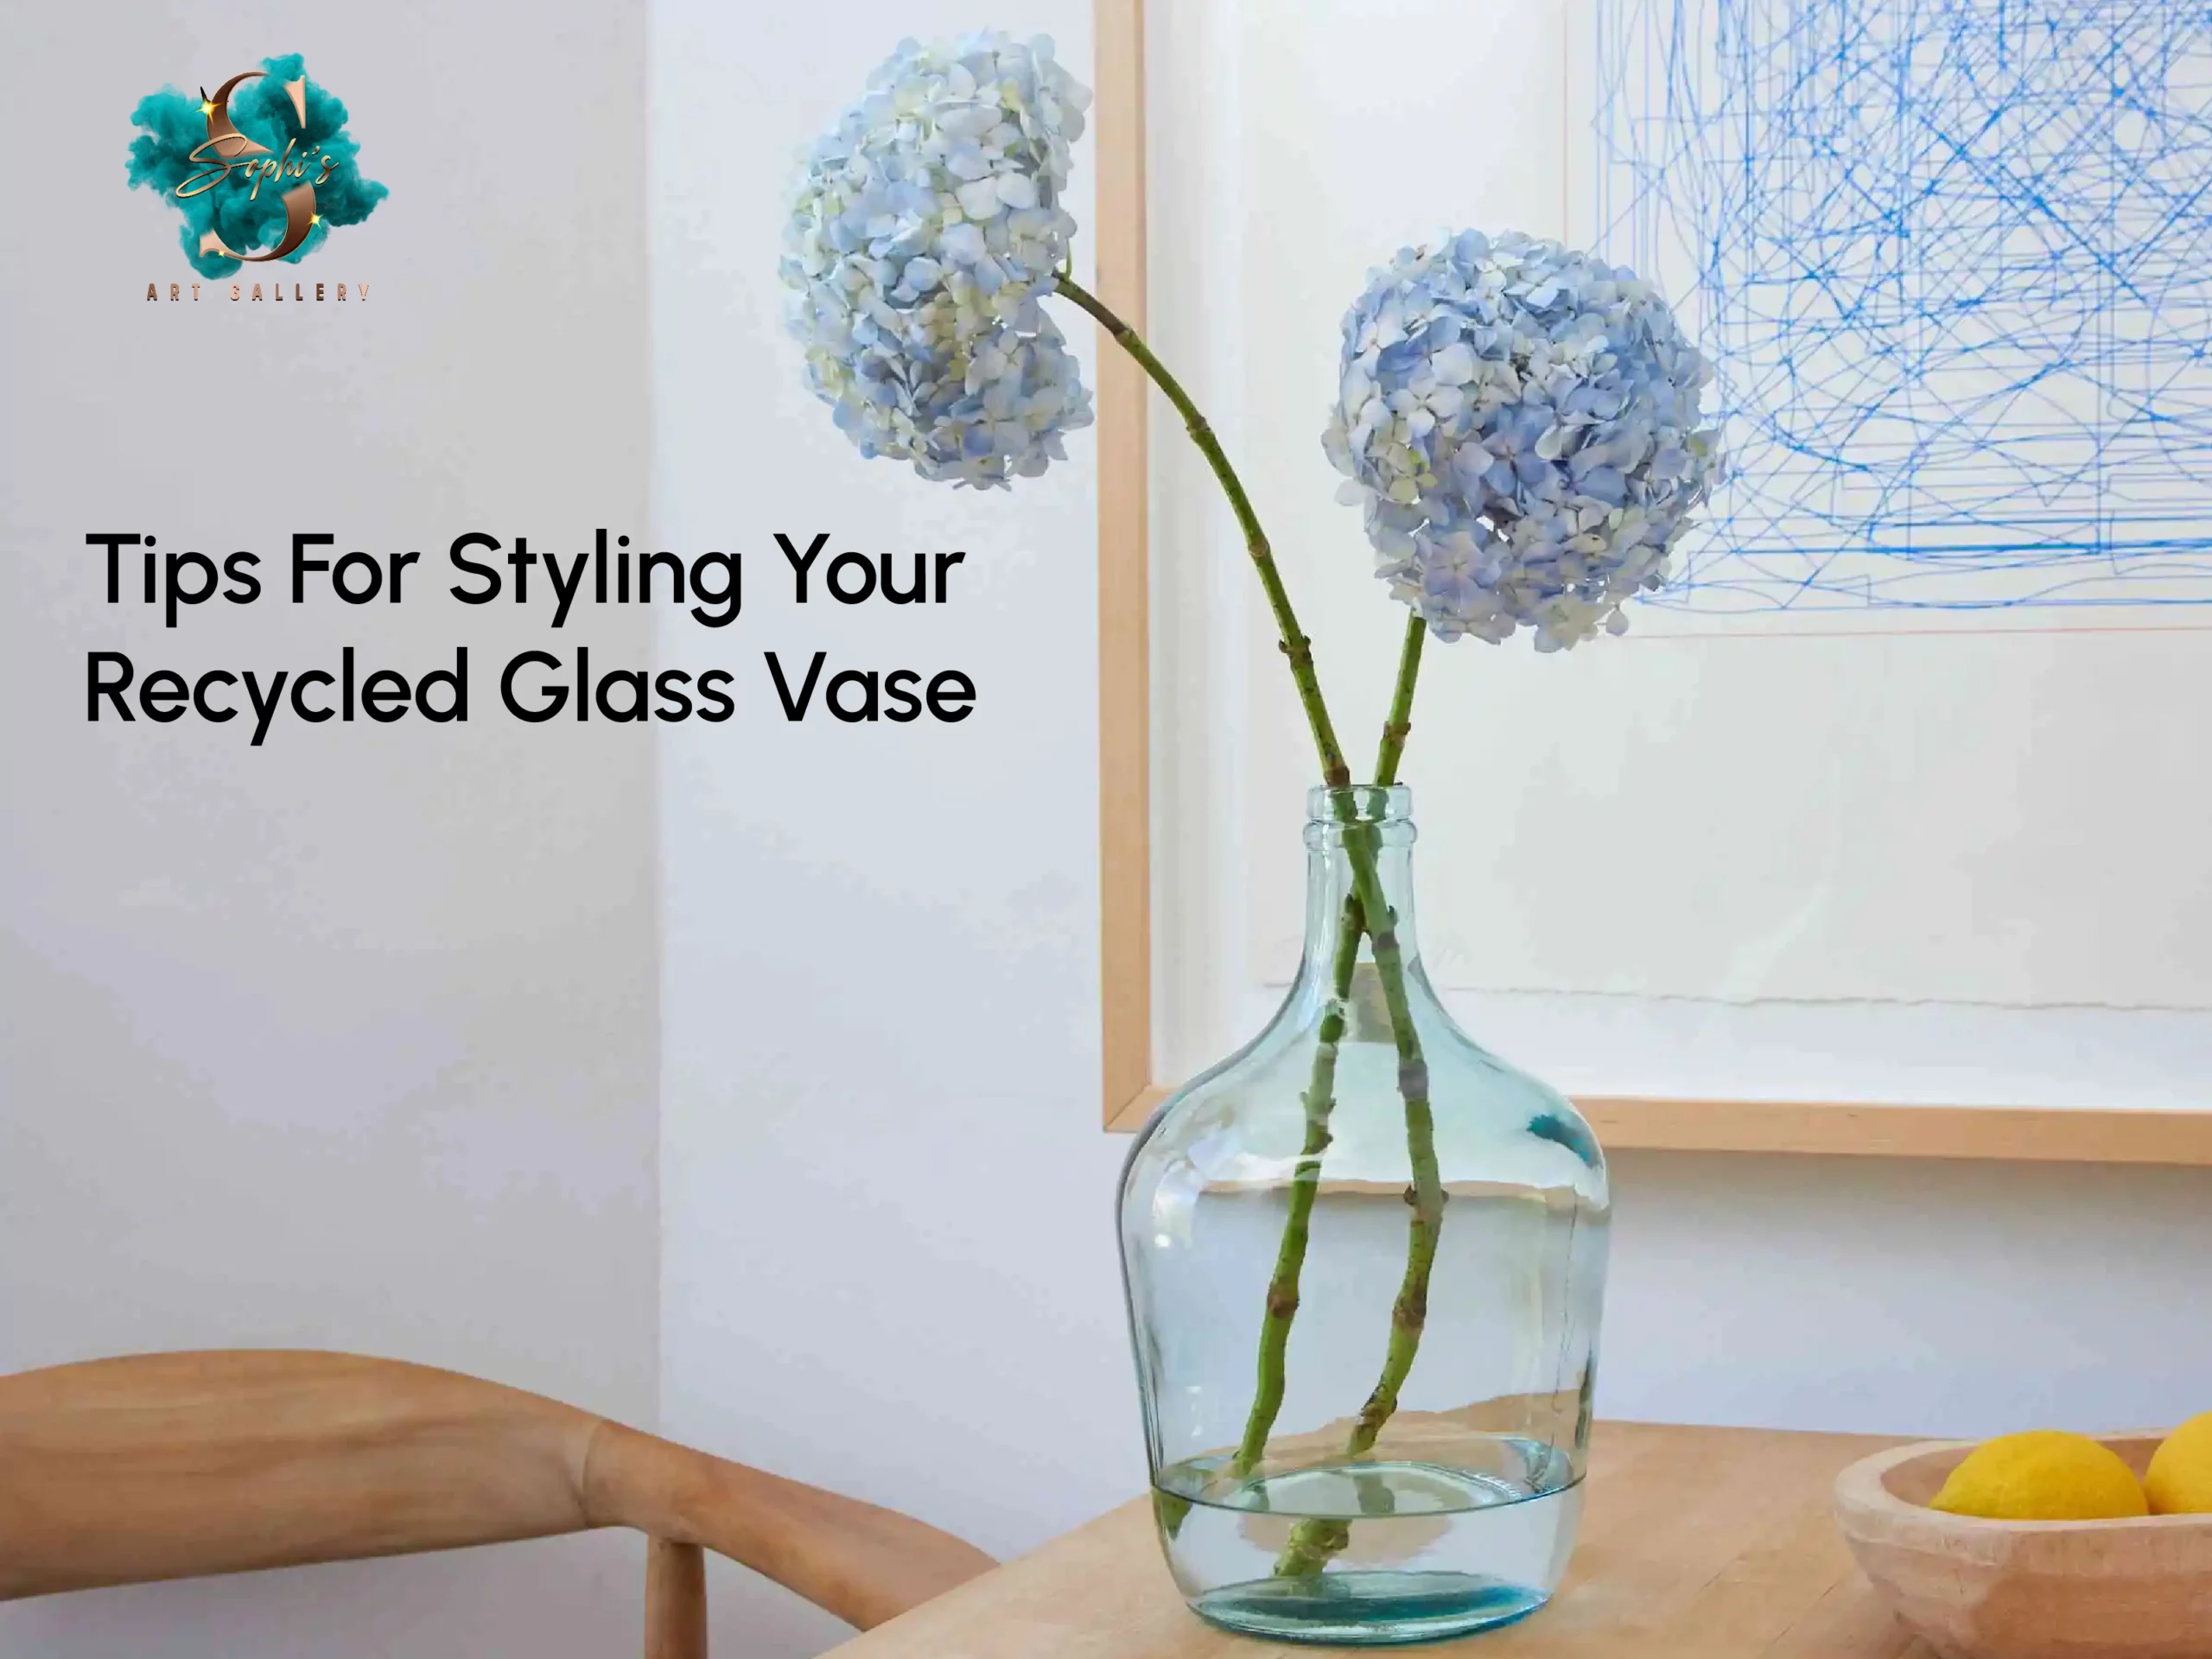 Tips For Styling Your Recycled Glass Vase